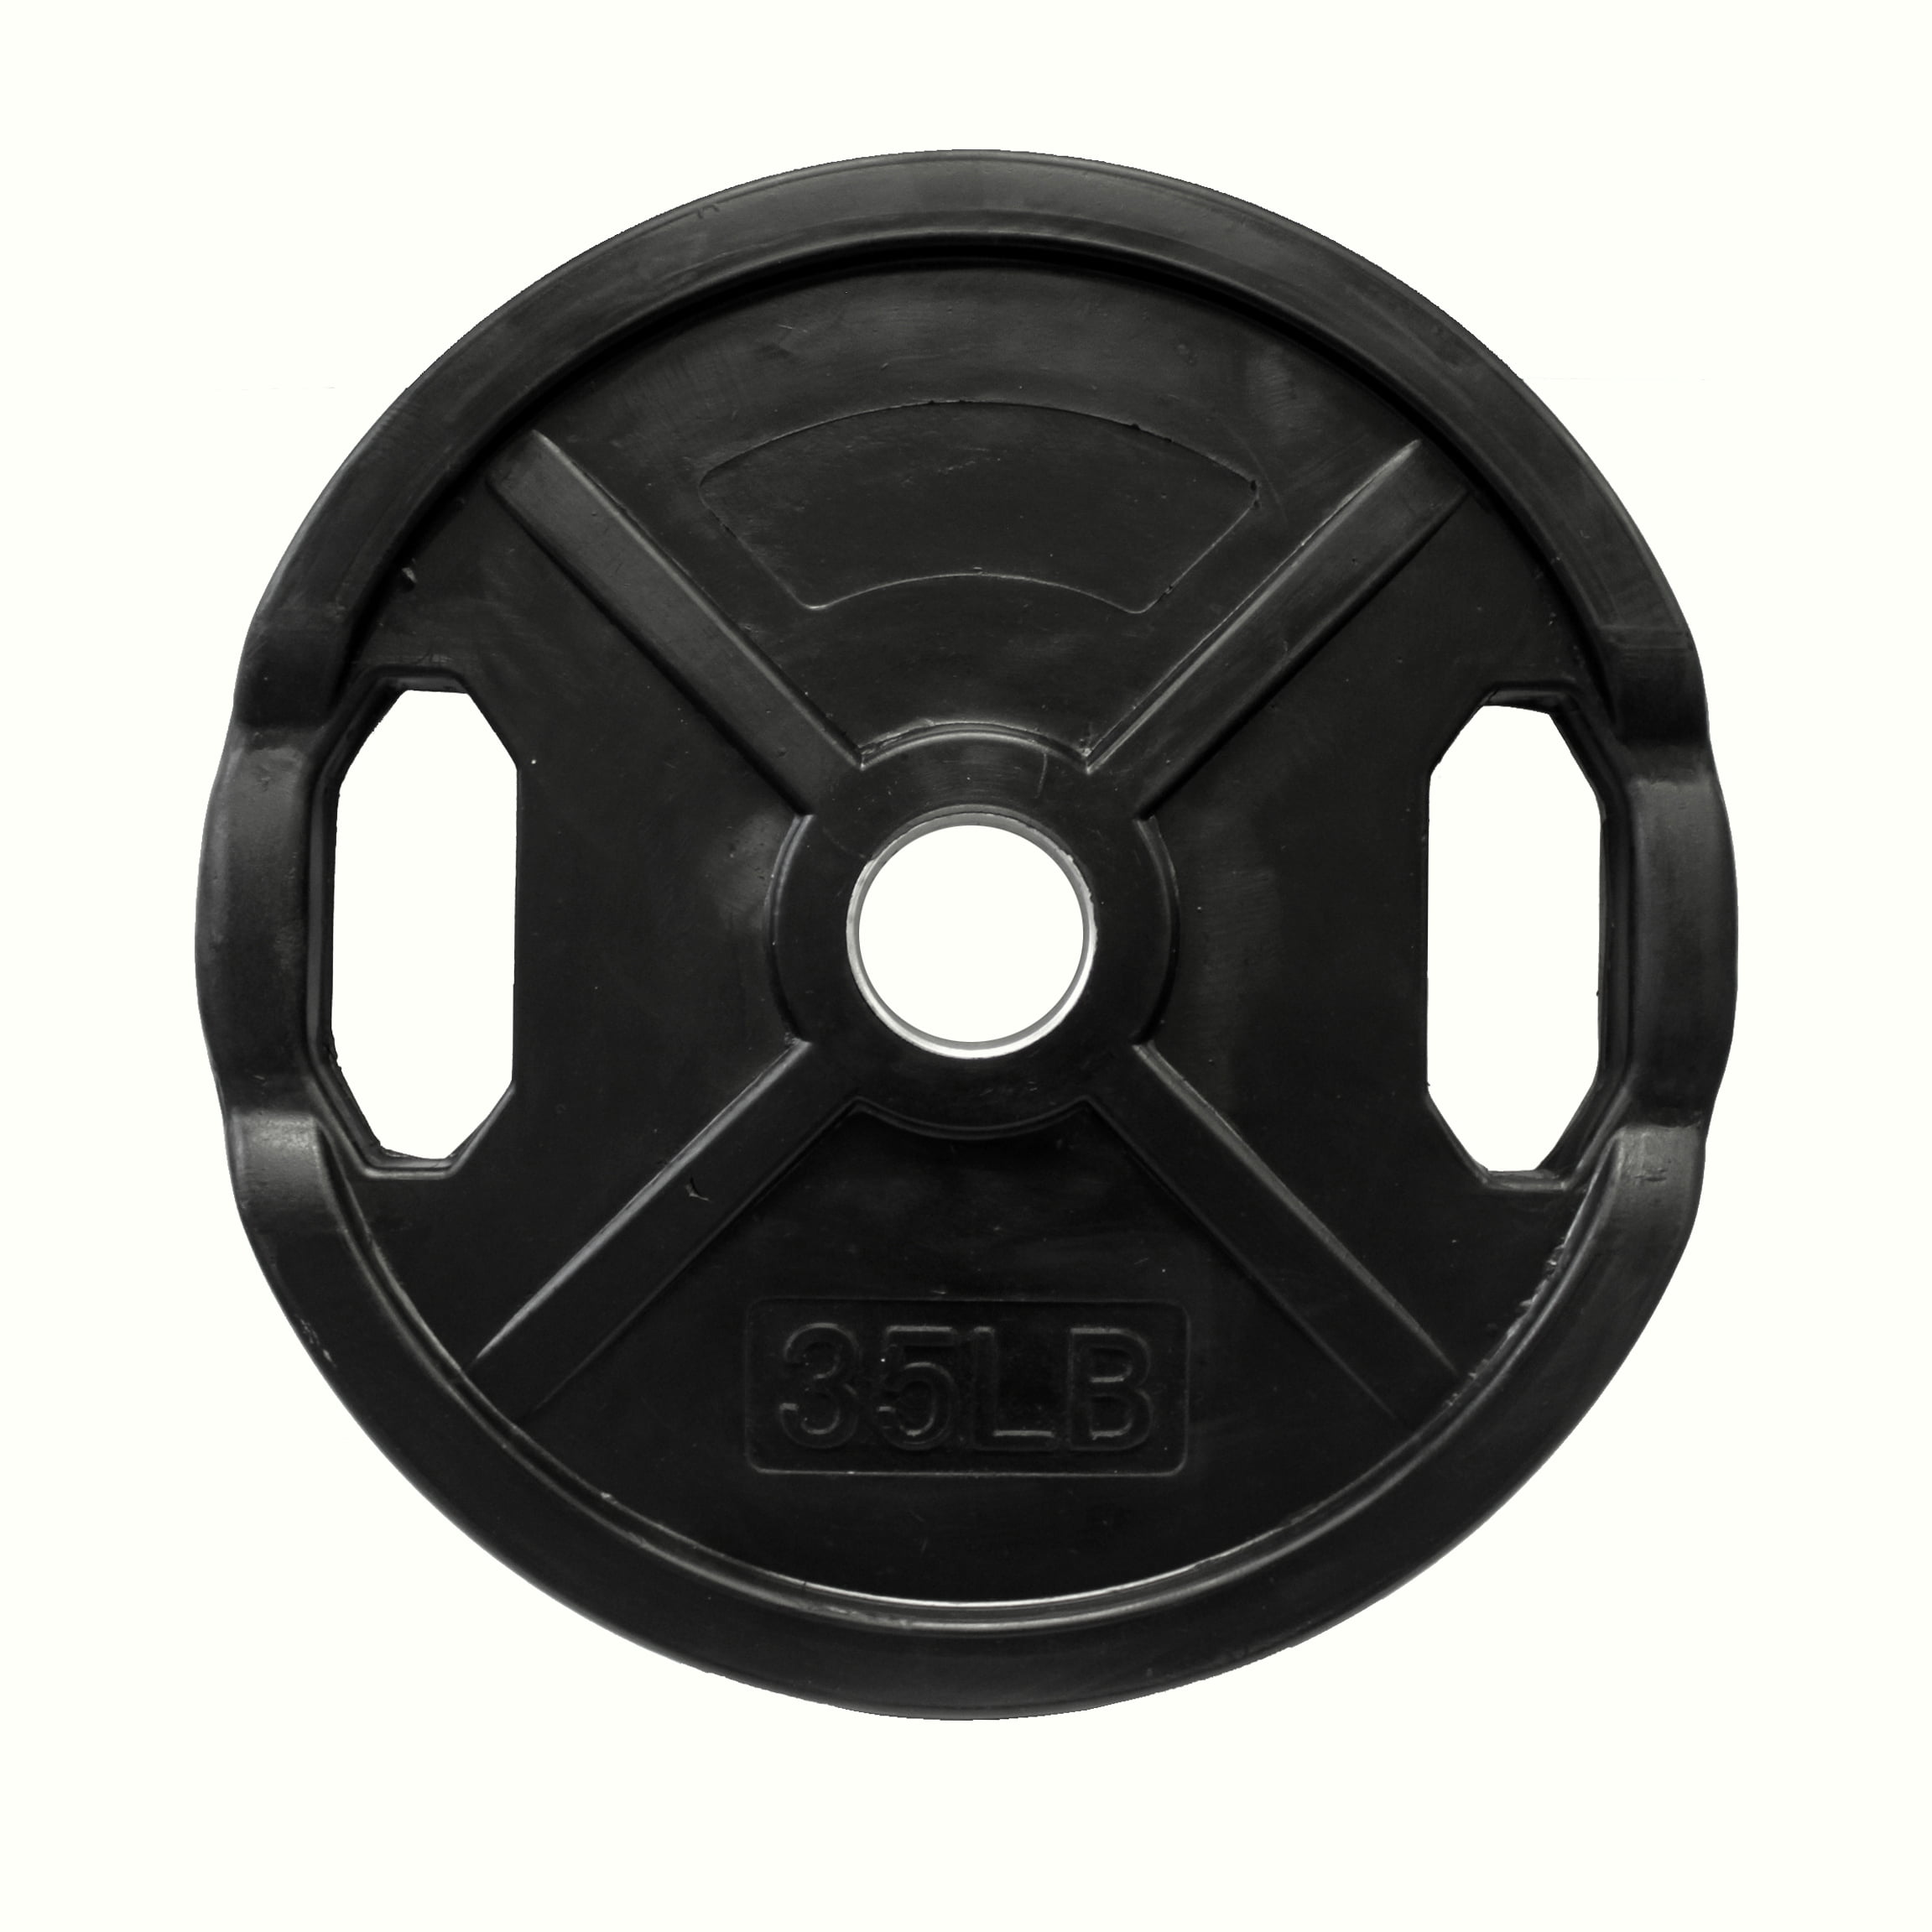 Ader Rubber Coated 1'' Plate Pair 7.5lb Black 